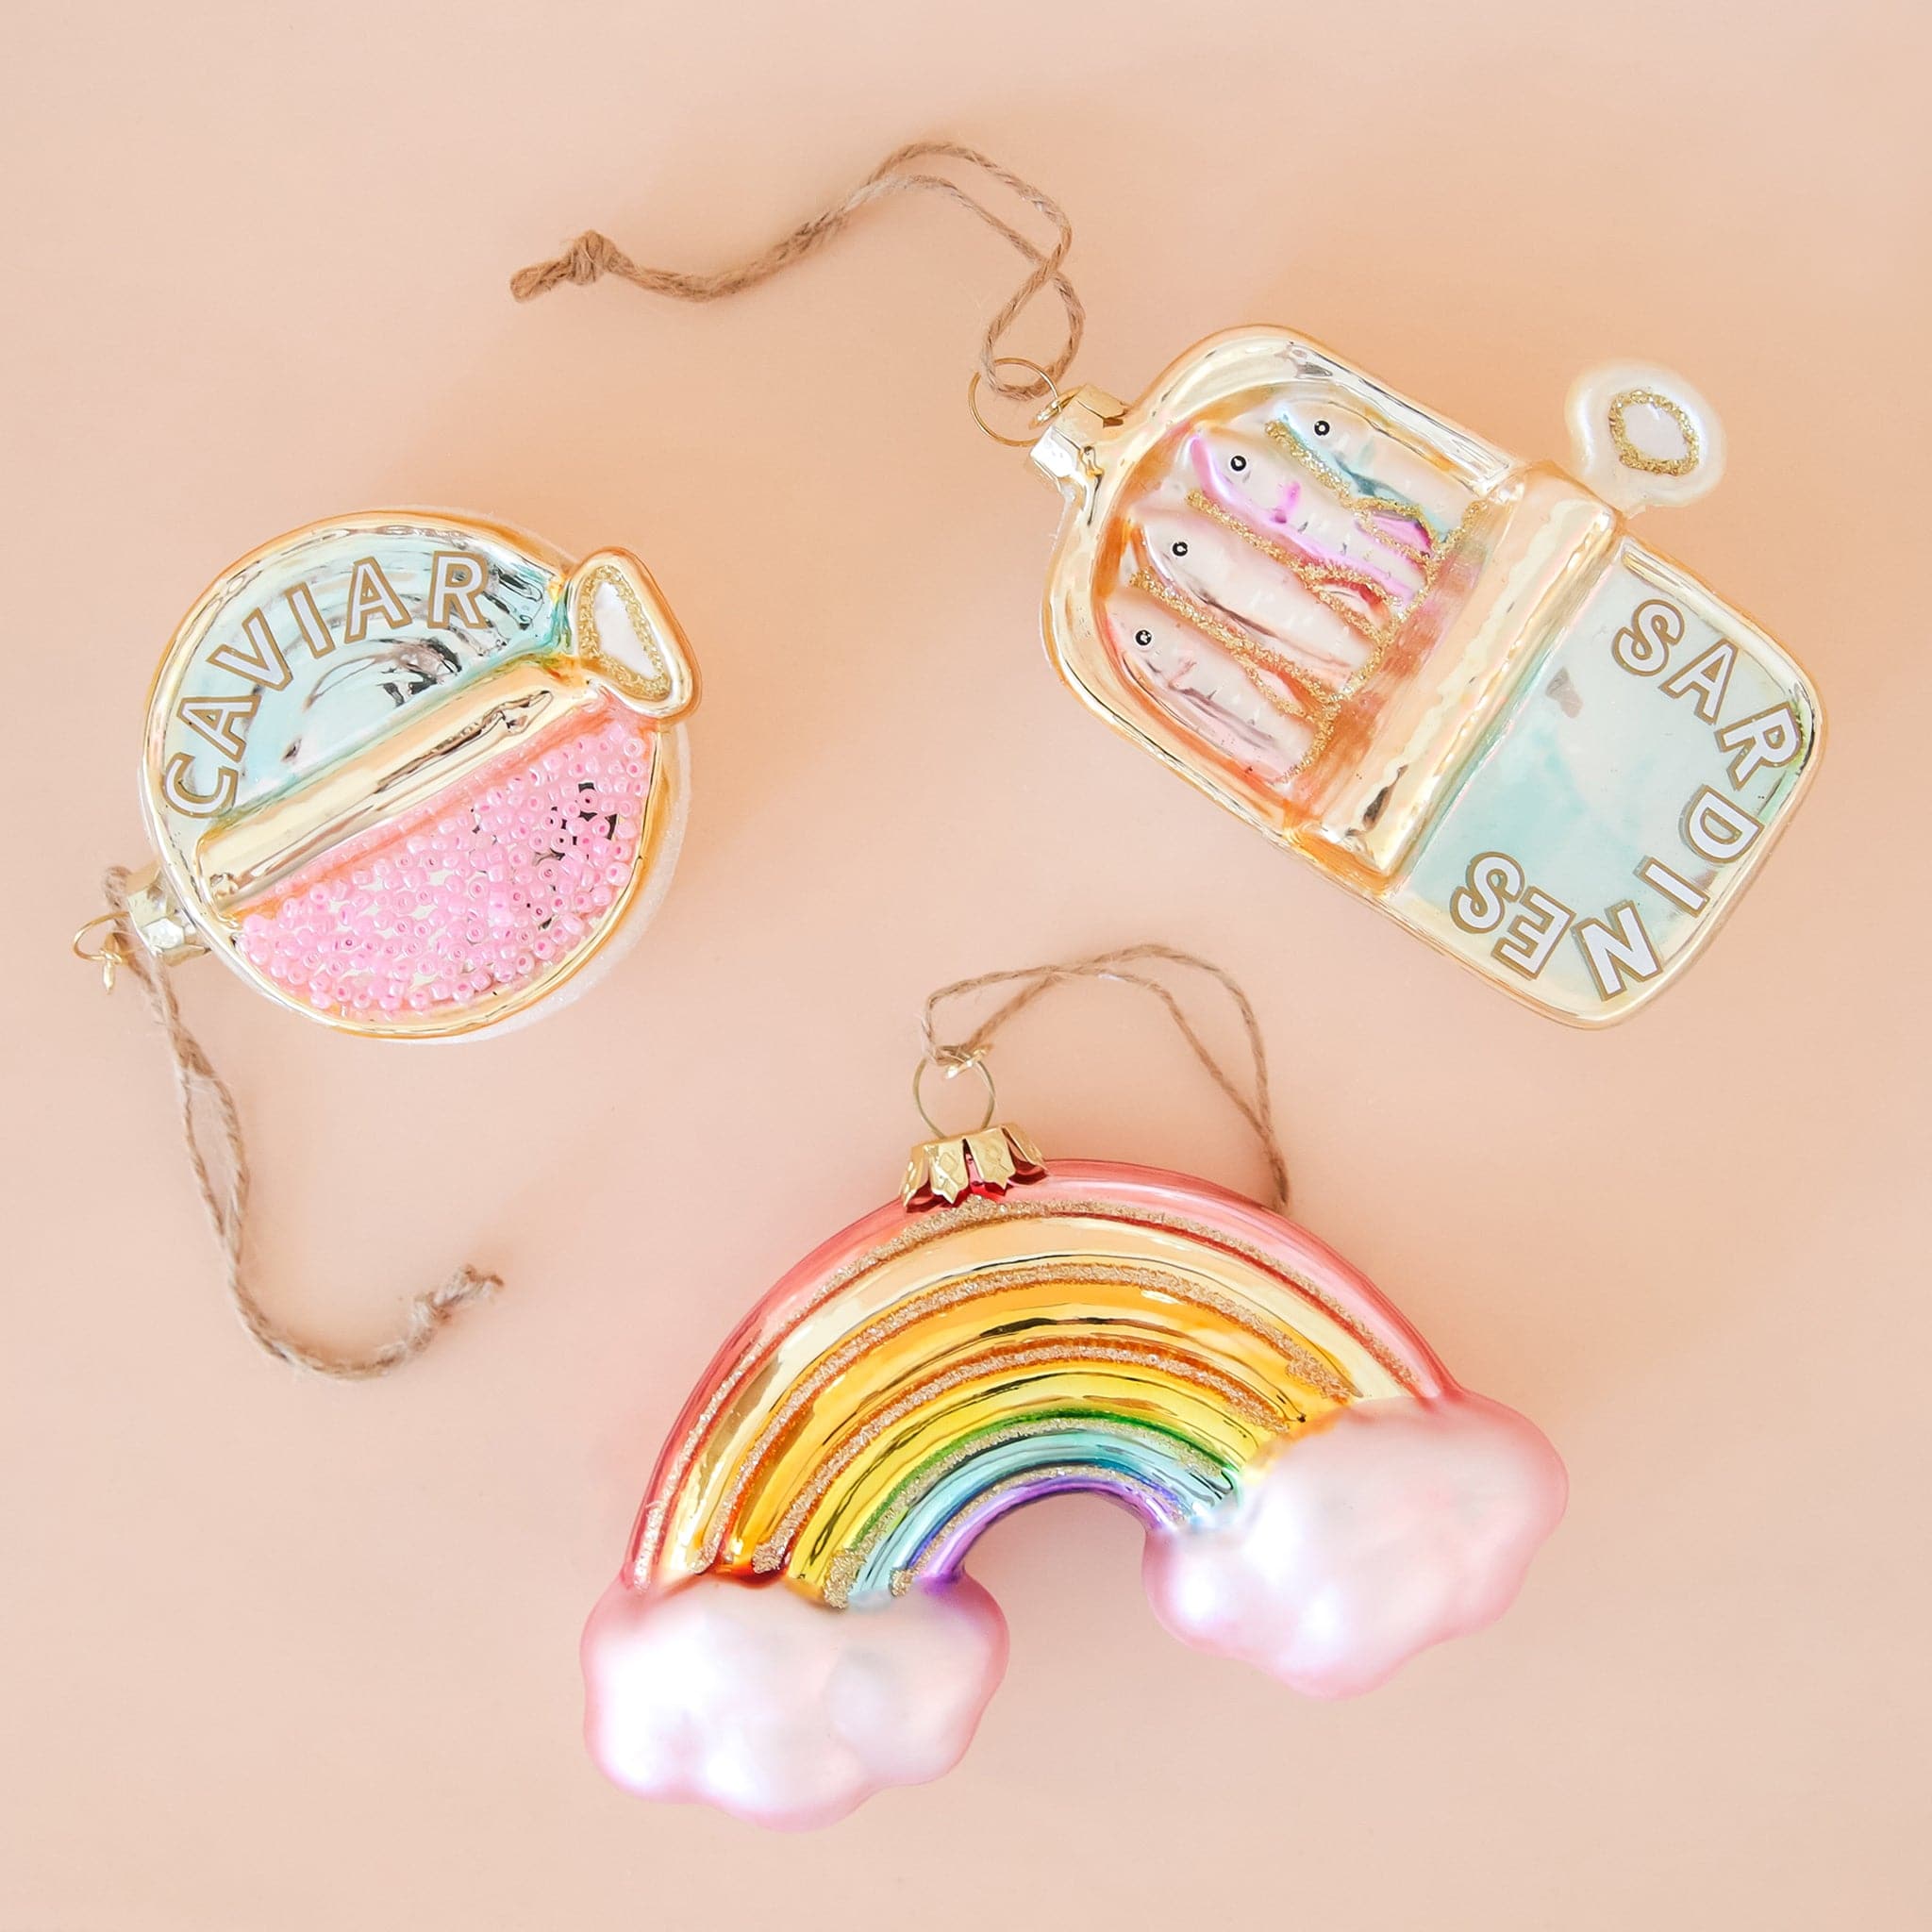 In front of a peachy background is three glass ornaments. On the bottom is a glass rainbow ornament. There is a light pink cloud on each end of the rainbow. Above it and on the right is a rectangular shaped ornament. One side is light blue with white text that reads ‘sardines.’ The other side has four colored fish. To the left is a circle ornament. The top half is light blue with white text that reads ‘caviar.’ The bottom half is covered with little pink beads. 